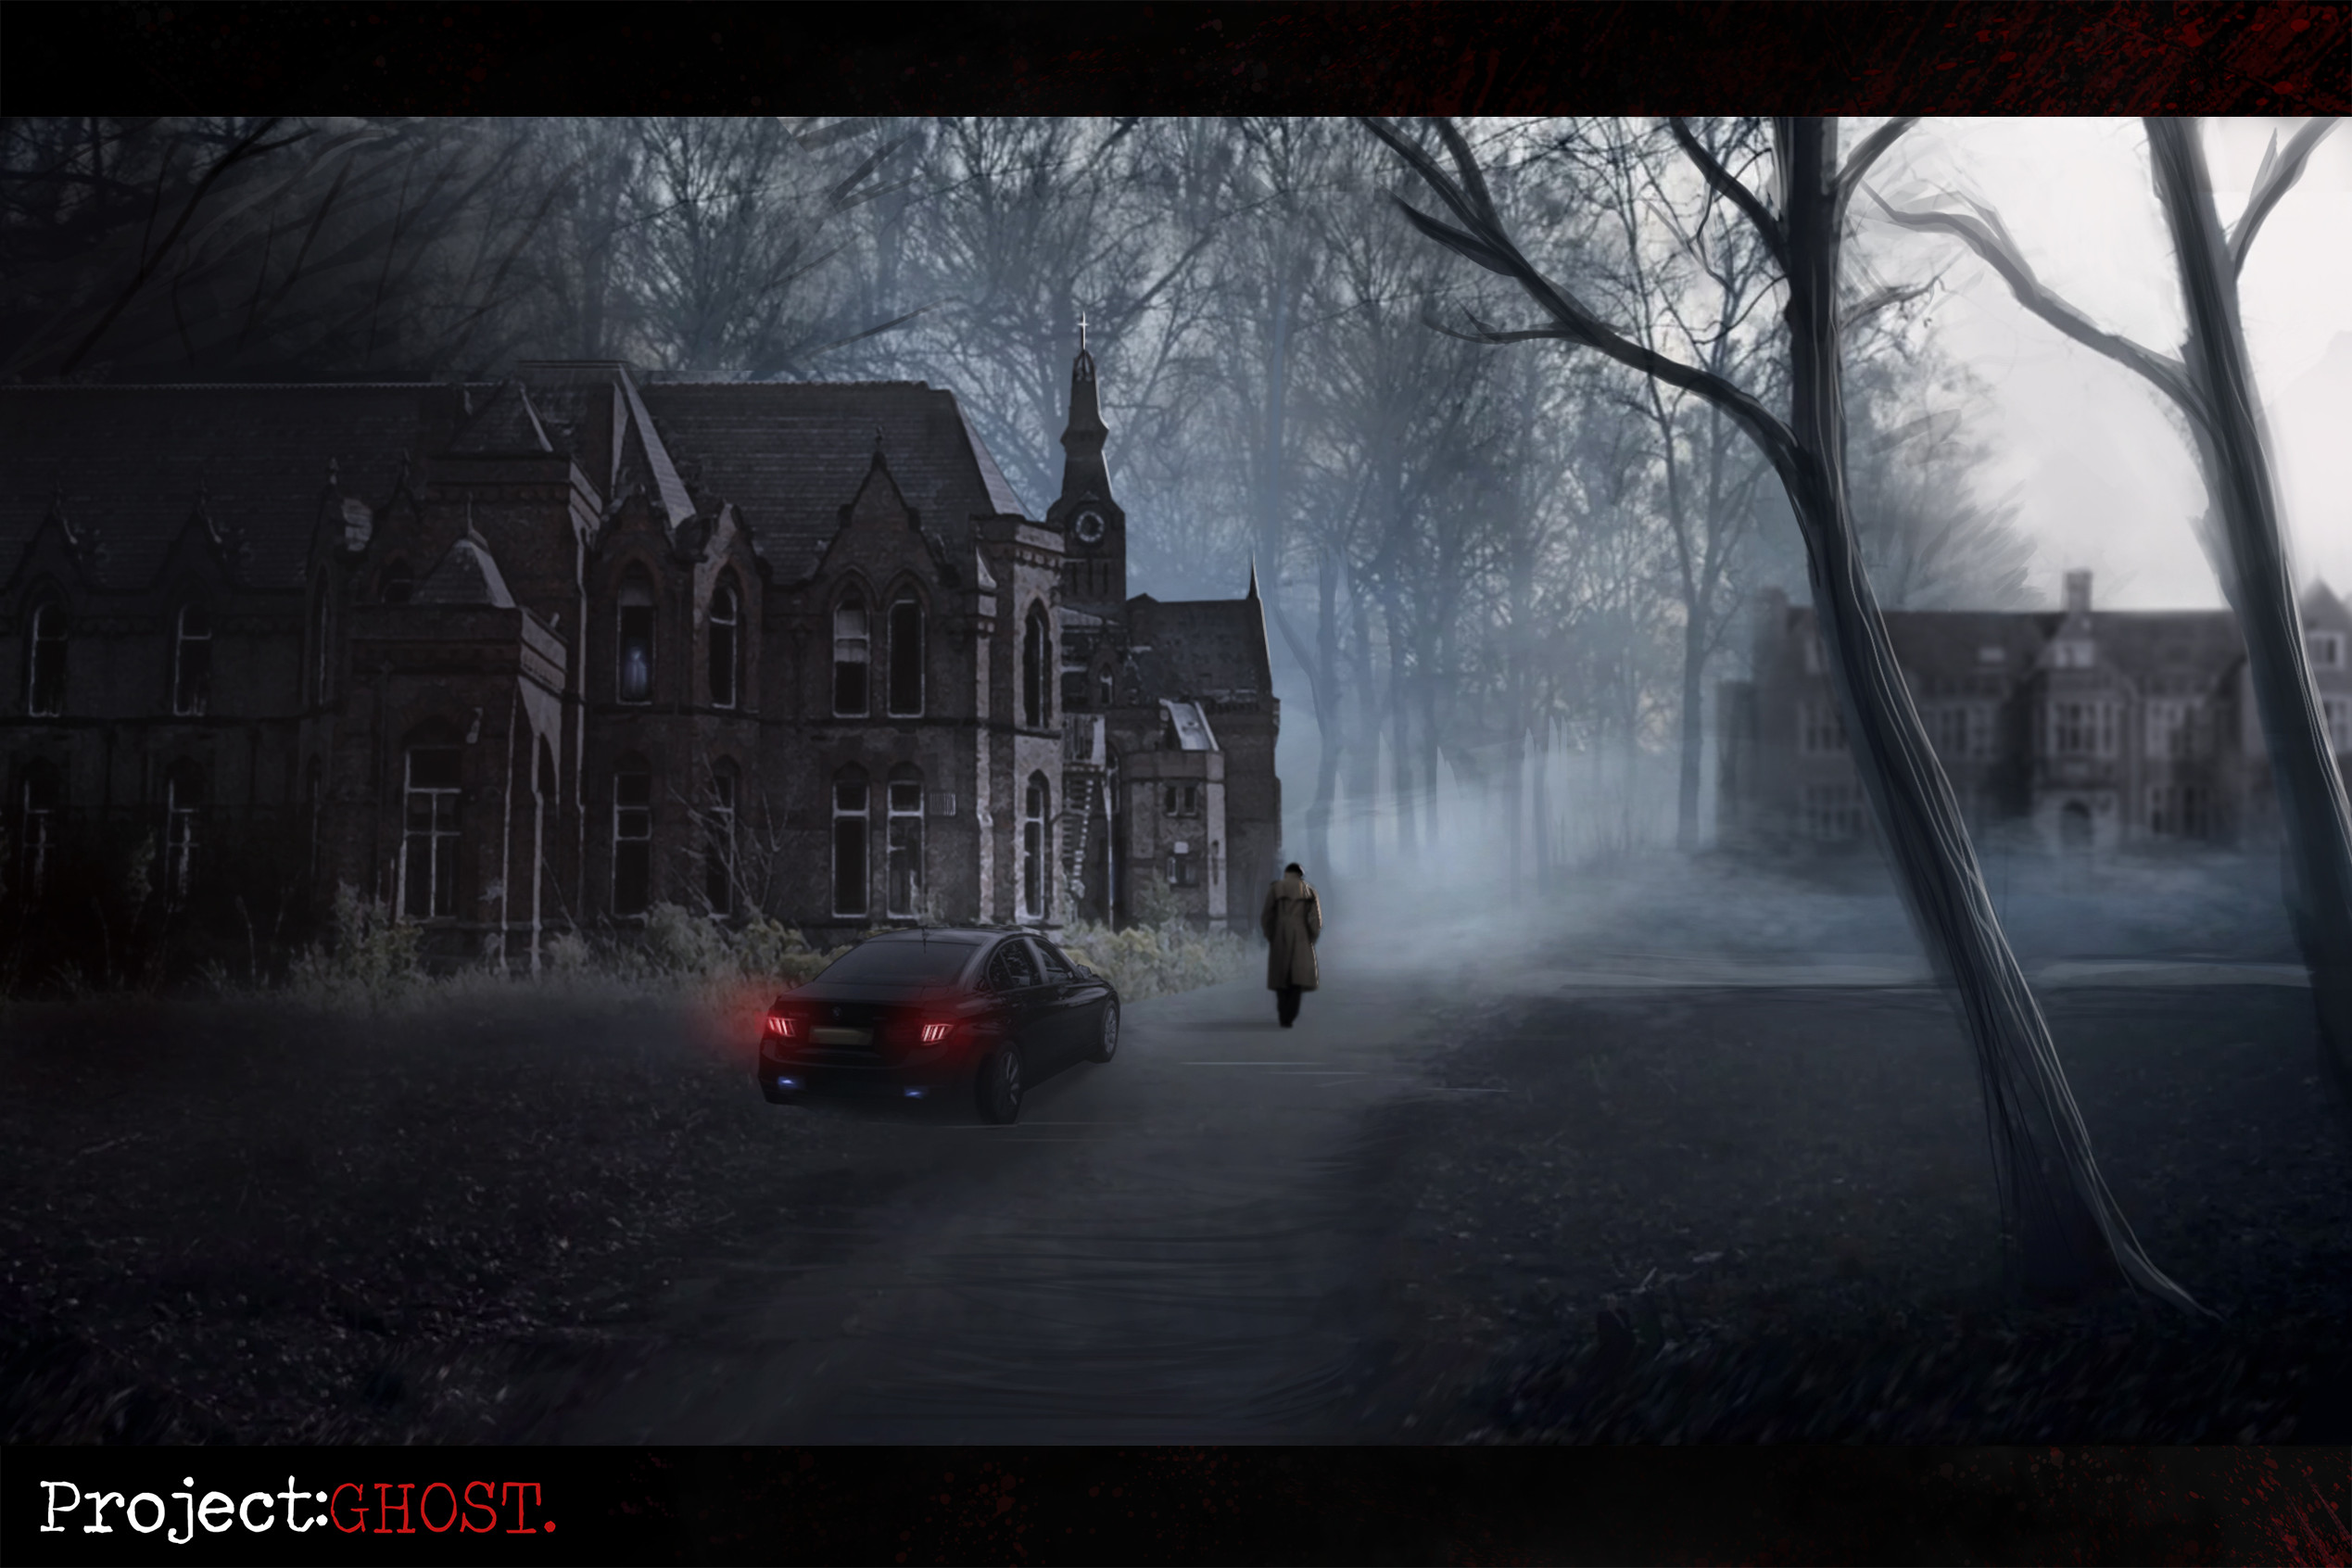 Thumbnail 4: Peter returns to the abandoned boarding school campus in the forest, determined to help Flynn. (Photobash is inspired by Barnes Hospital in Cheadle, Manchester). However, it appears someone is watching him... 